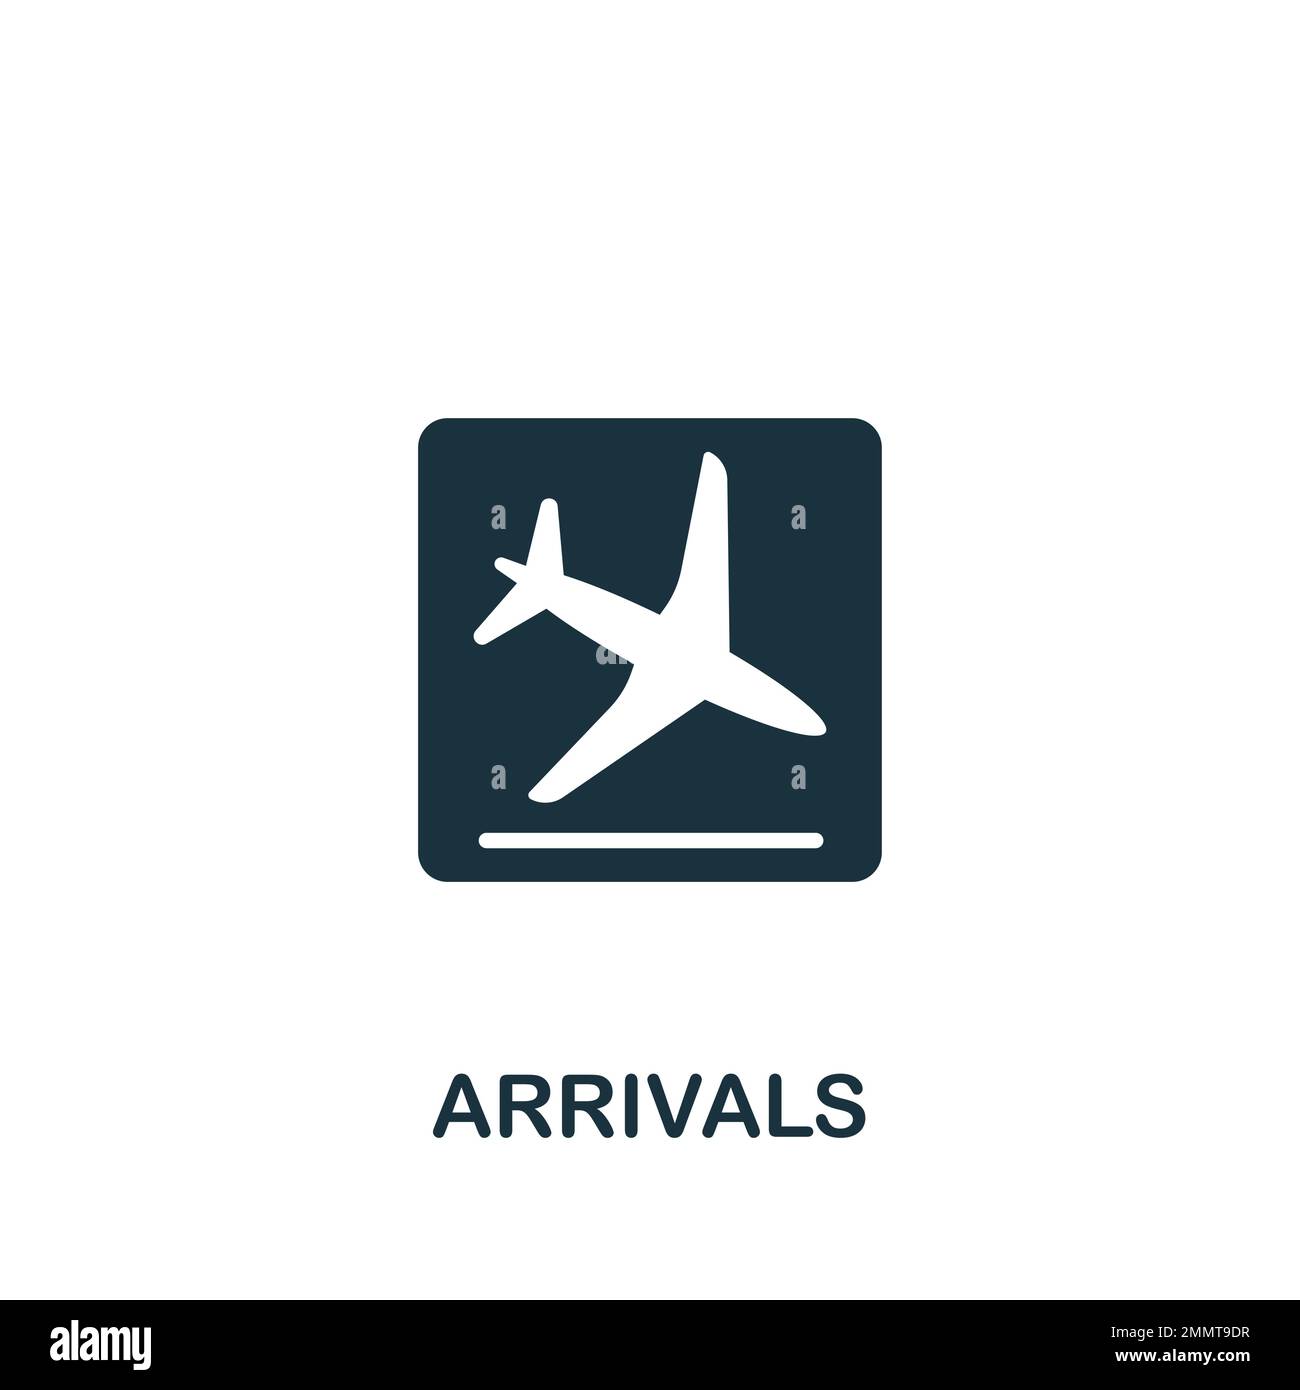 Arrivals icon. Monochrome simple sign from airport elements collection. Arrivals icon for logo, templates, web design and infographics. Stock Vector